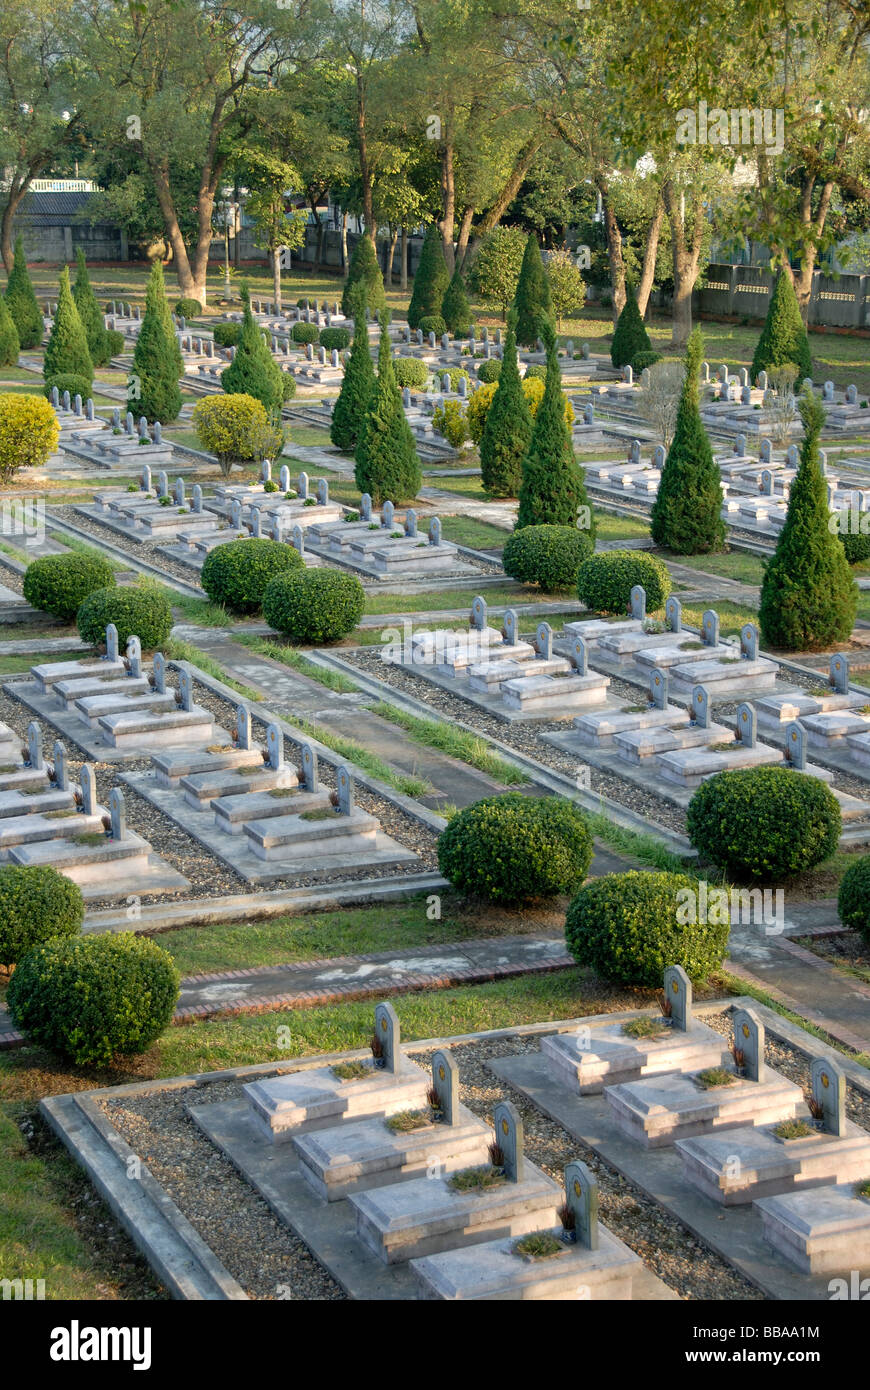 War graves, many tombstones of fallen Viet Minh soldiers, military cemetery, Dien Bien Phu, Vietnam, Southeast Asia, Asia Stock Photo